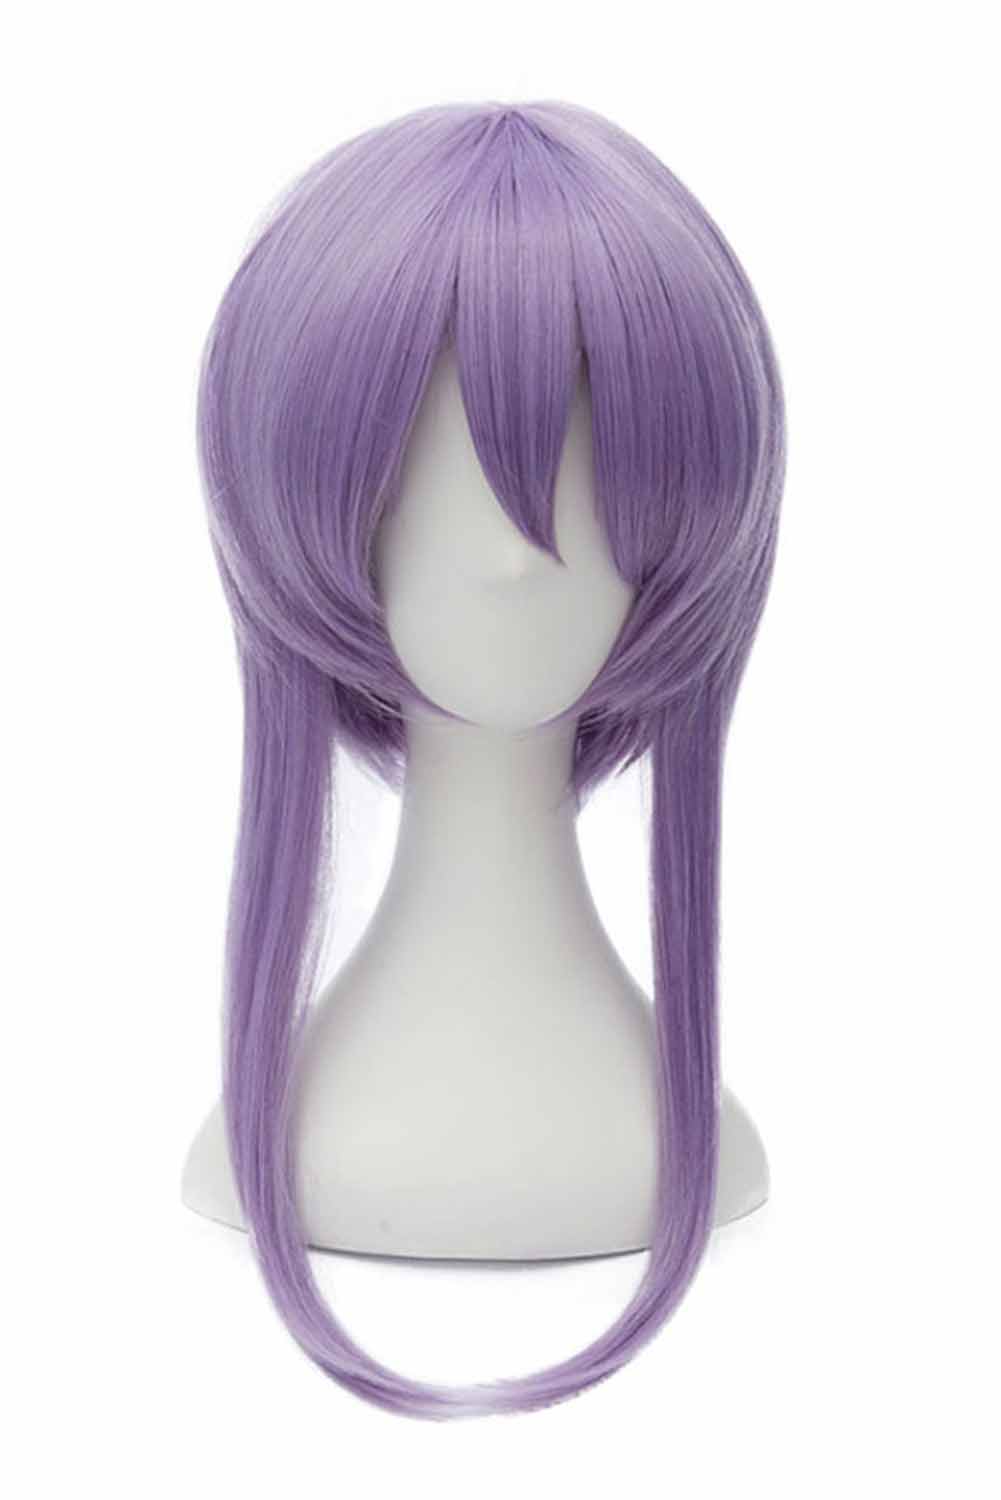 Anime Seraph of the End Shinoa Hiiragi Cosplay Wig Heat Resistant Synthetic Hair Halloween Costume Accessories